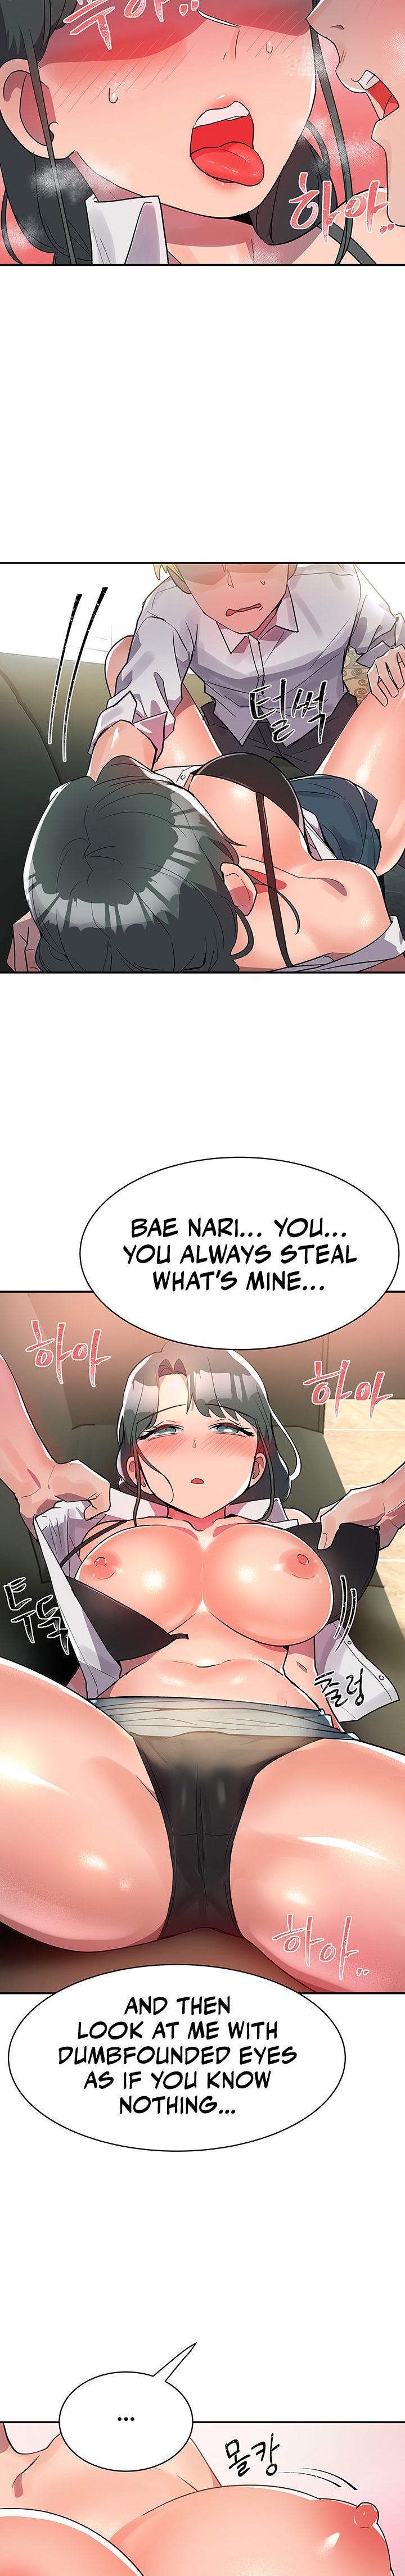 Relationship Reverse Button: Let’s Educate That Arrogant Girl - Chapter 3 Page 14